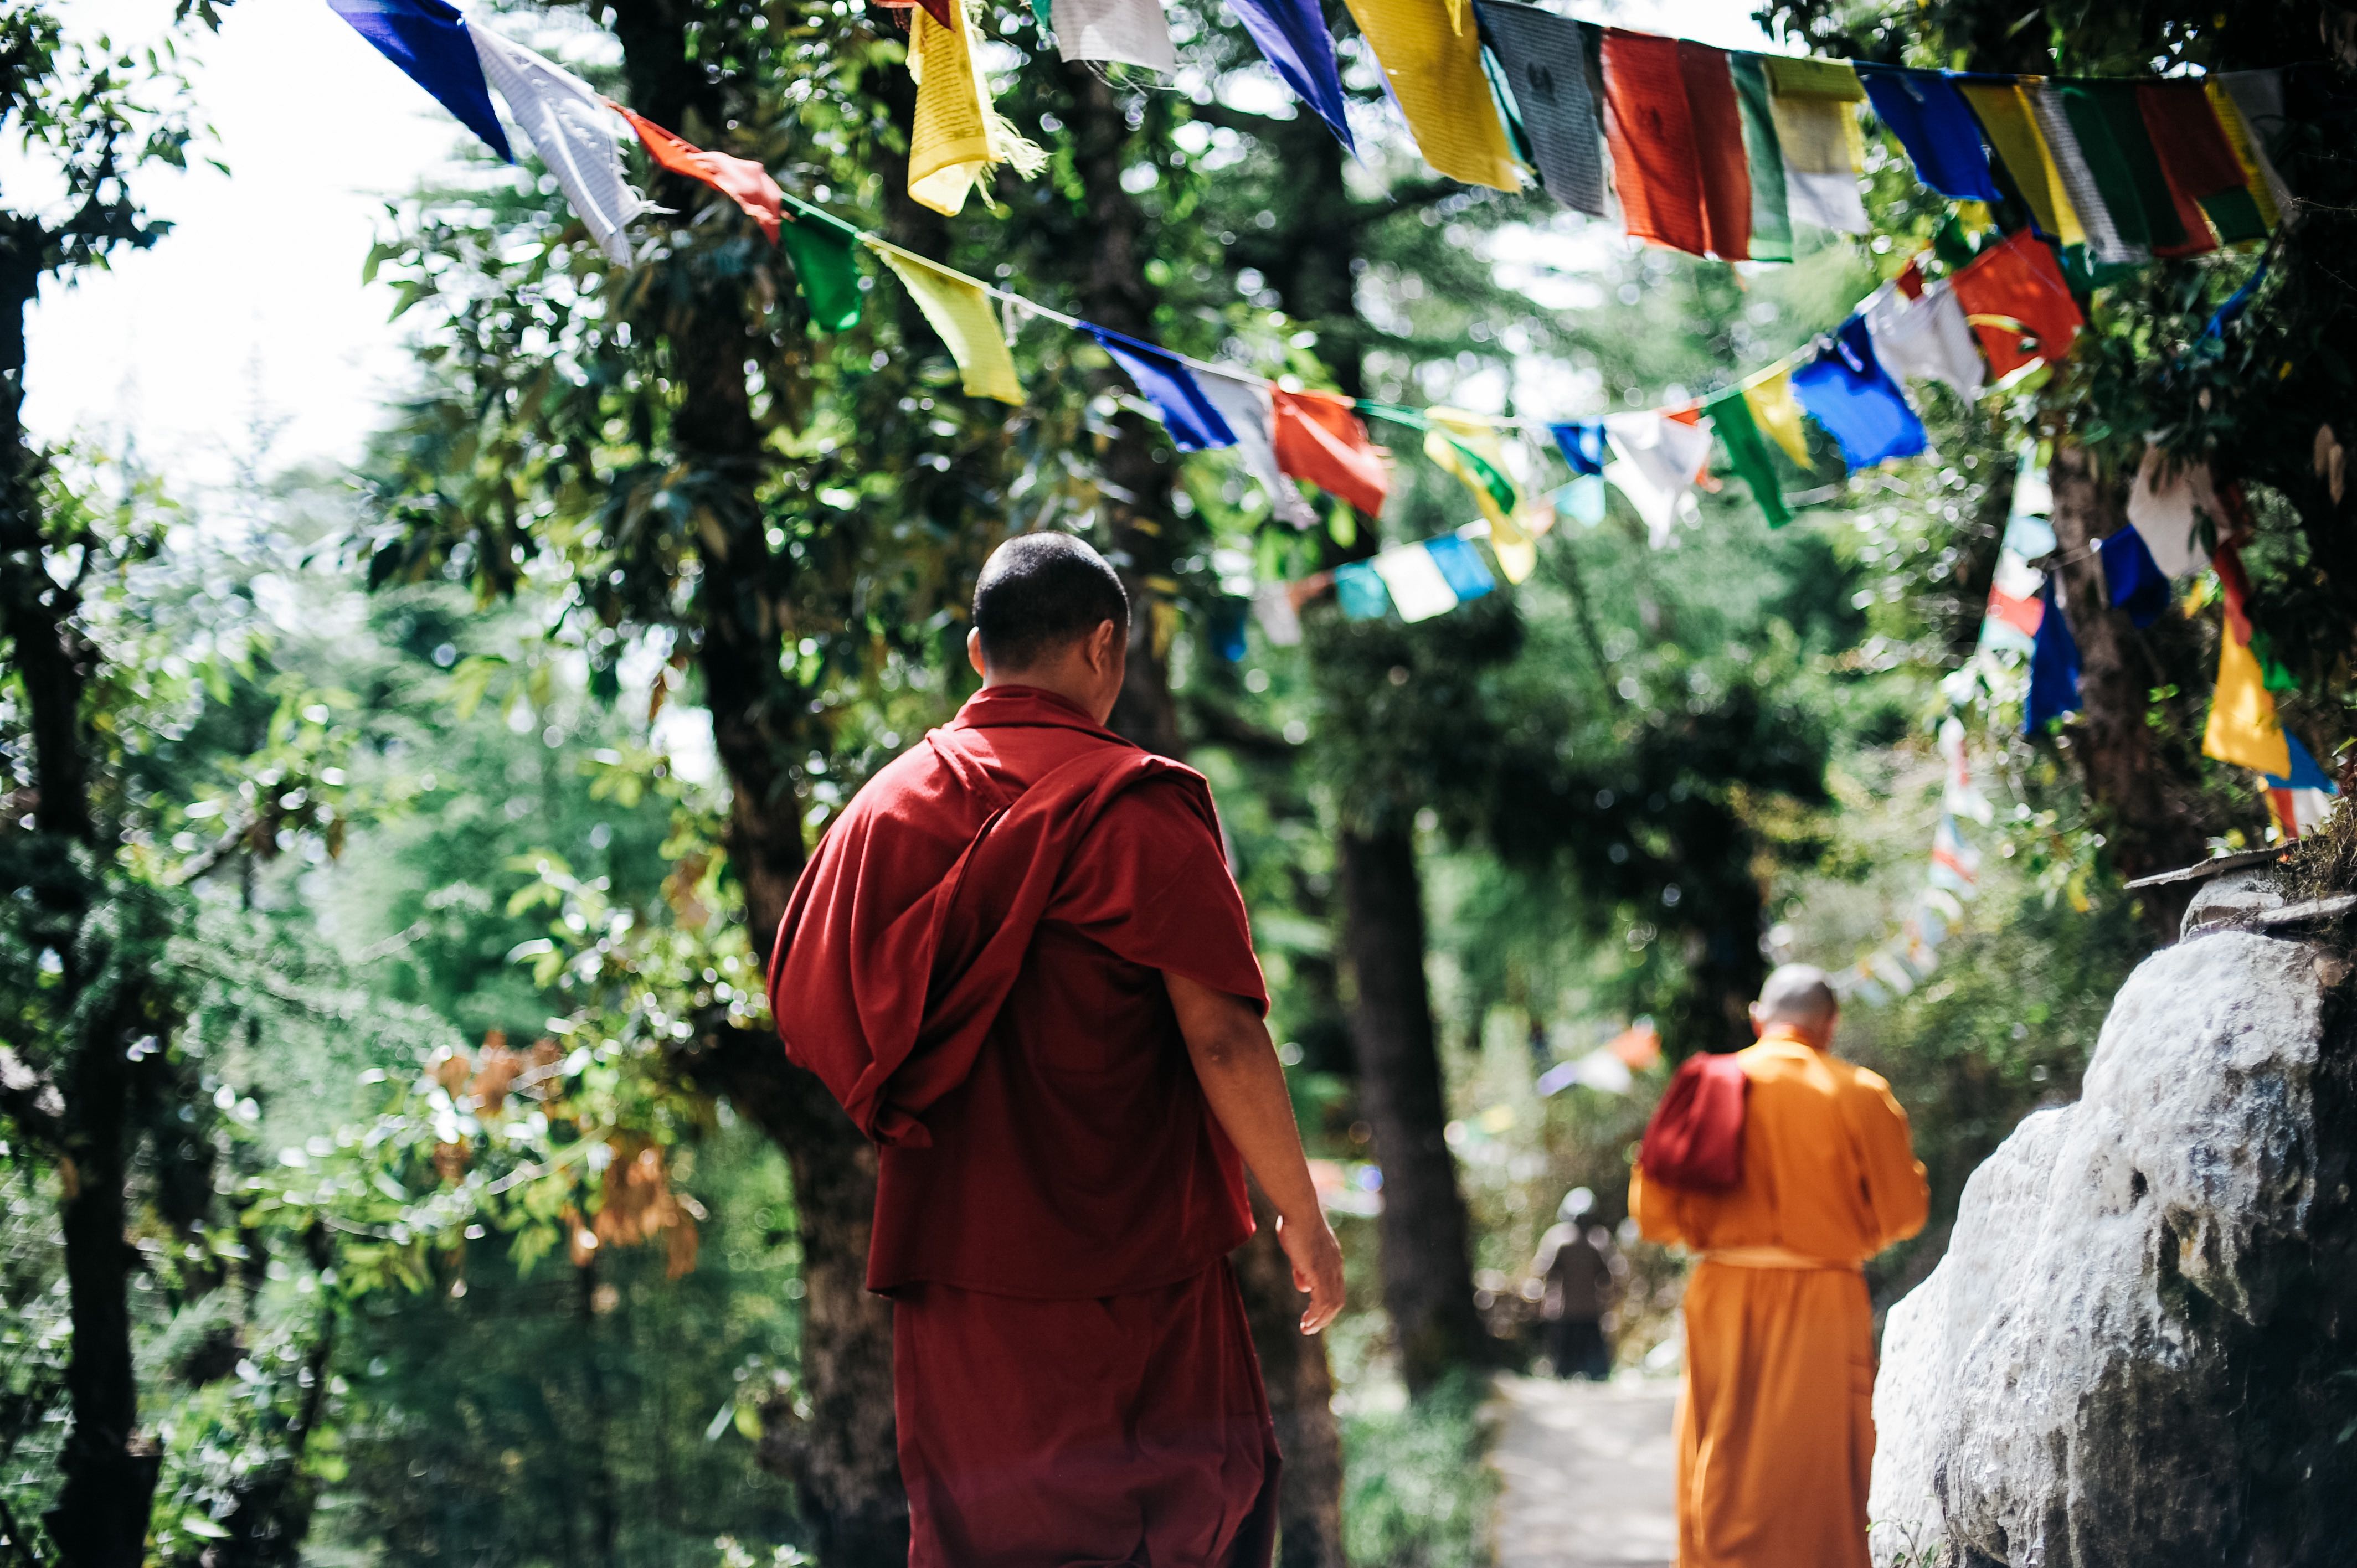 Buddhist monks walk away from the camera along a path lined with trees and prayer flags